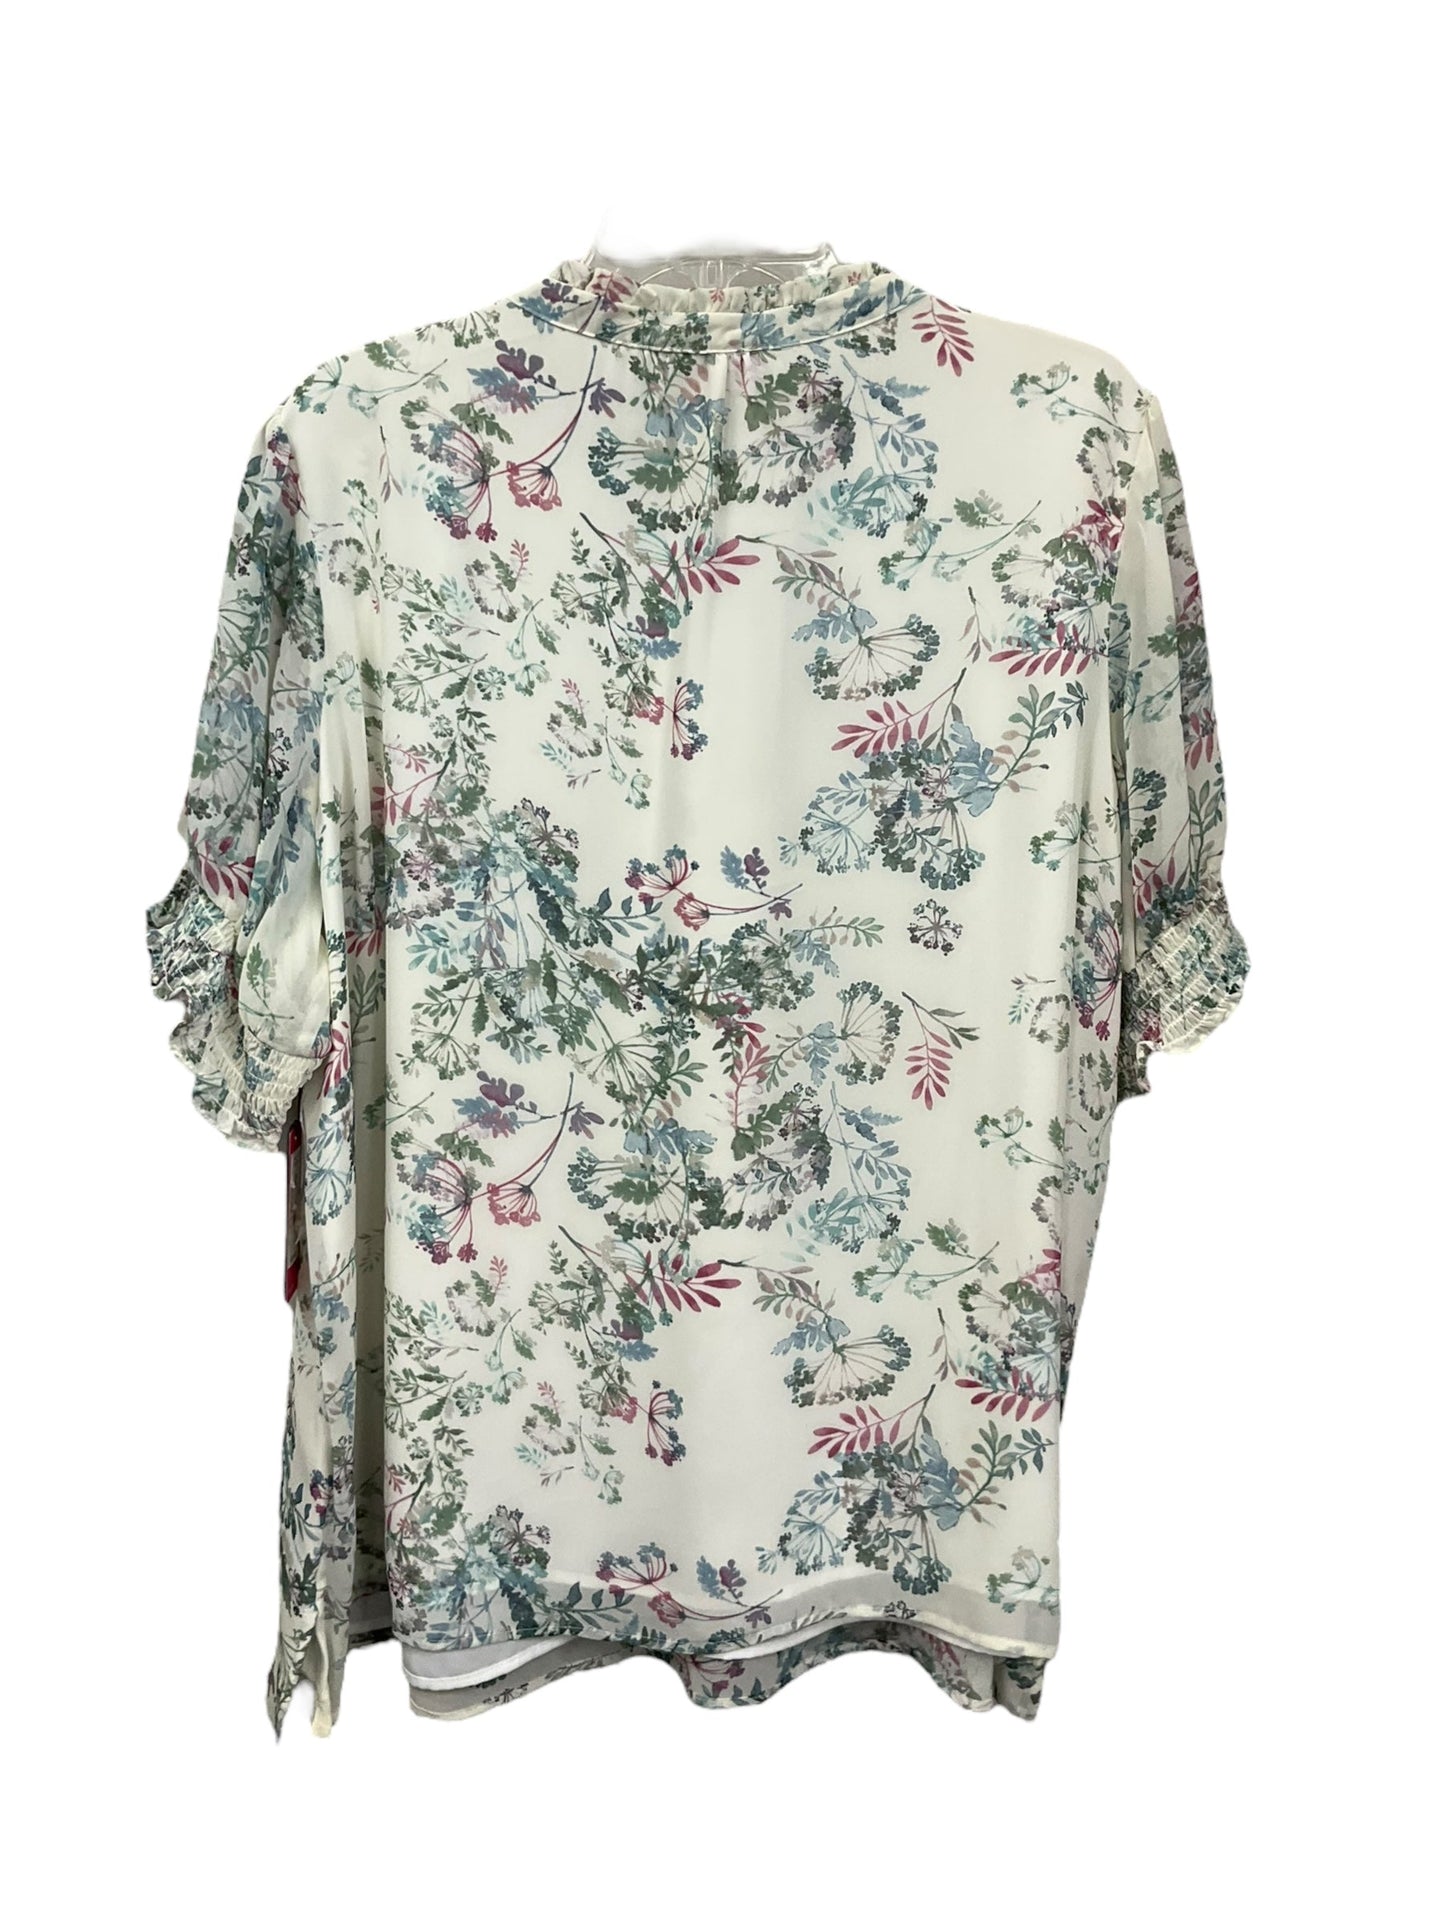 Floral Print Top Short Sleeve Vince Camuto, Size 2x